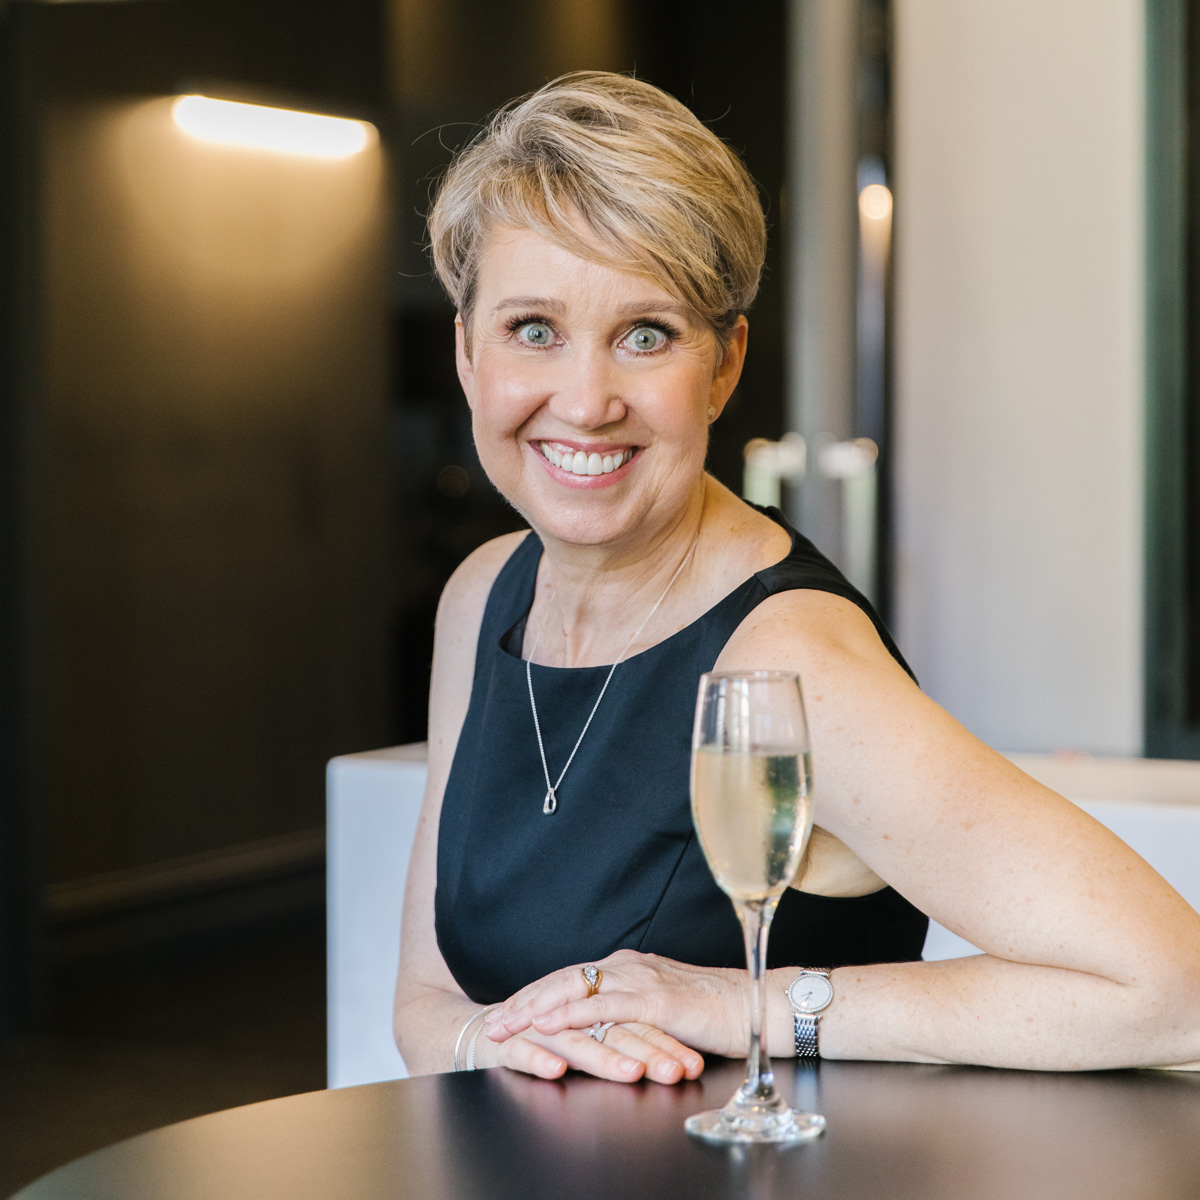 A photo of Sinja seated at a table with a glass of champagne looking at the camera.